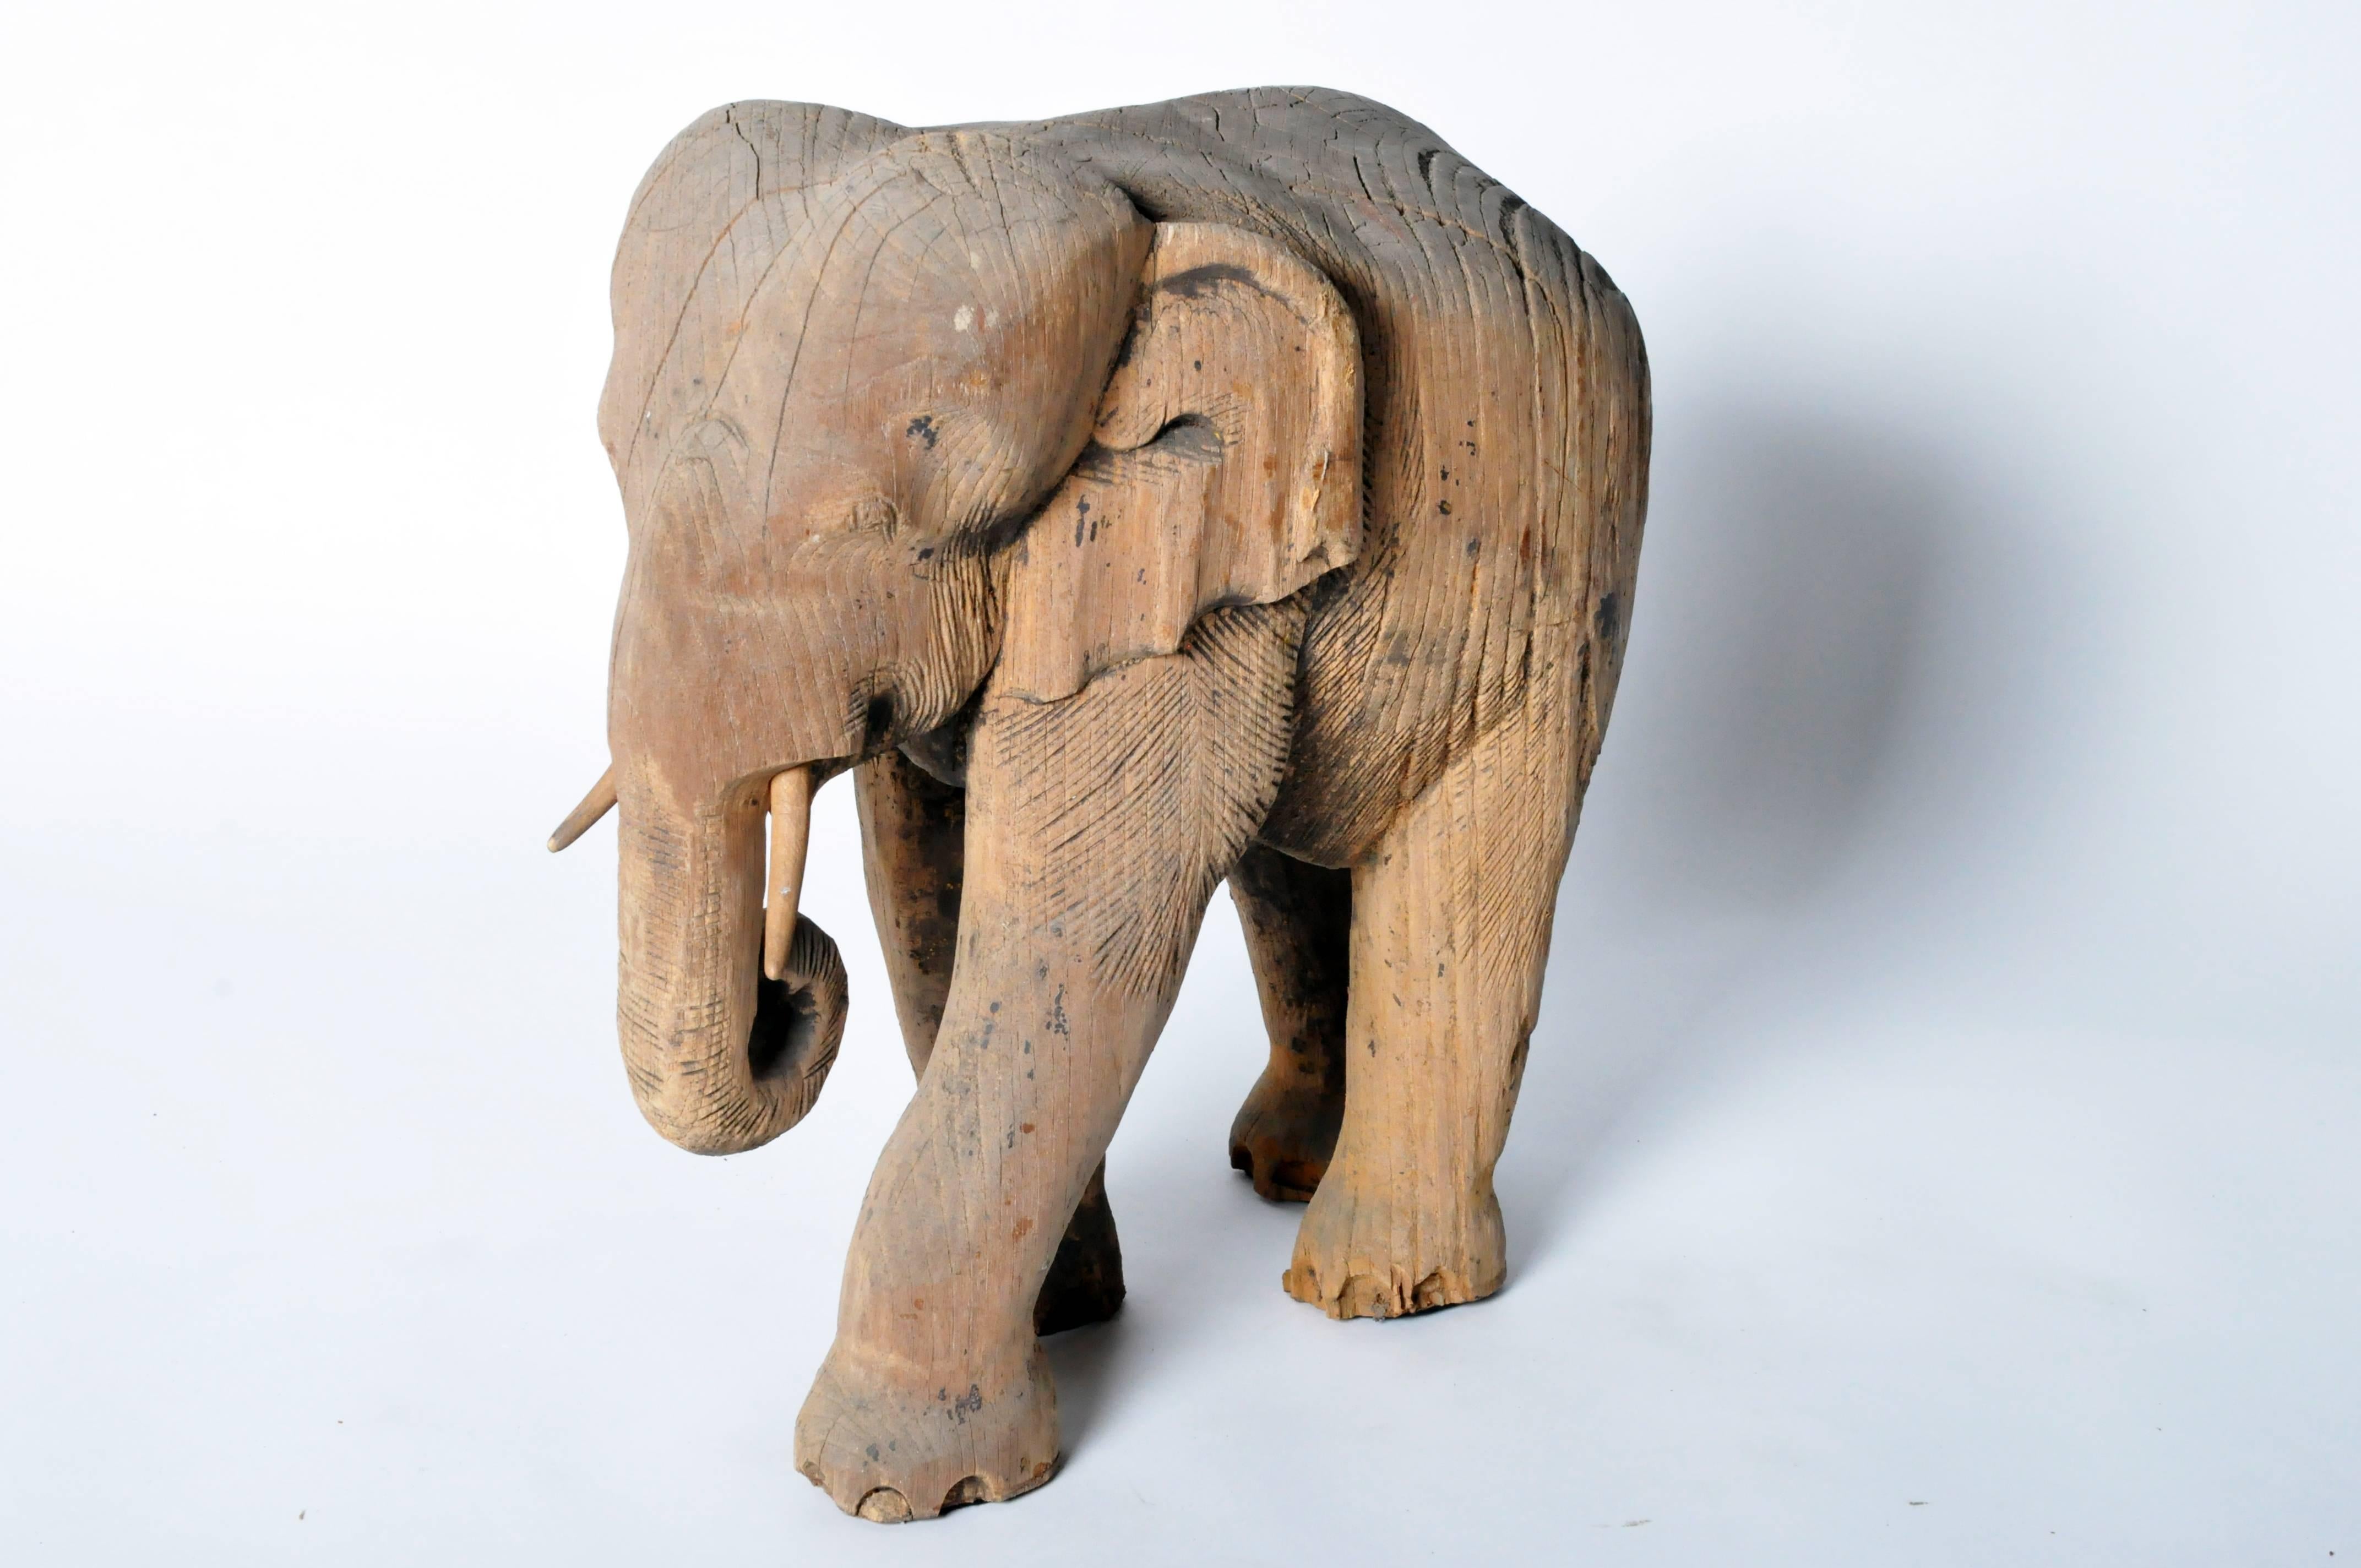 Substantial and burly, like the majestic creatures it’s modeled after, this pachyderm is hand-carved from a solid block of wood. Depicted standing with trunk curled, this large elephant has a gentle presence that is further softened by the natural